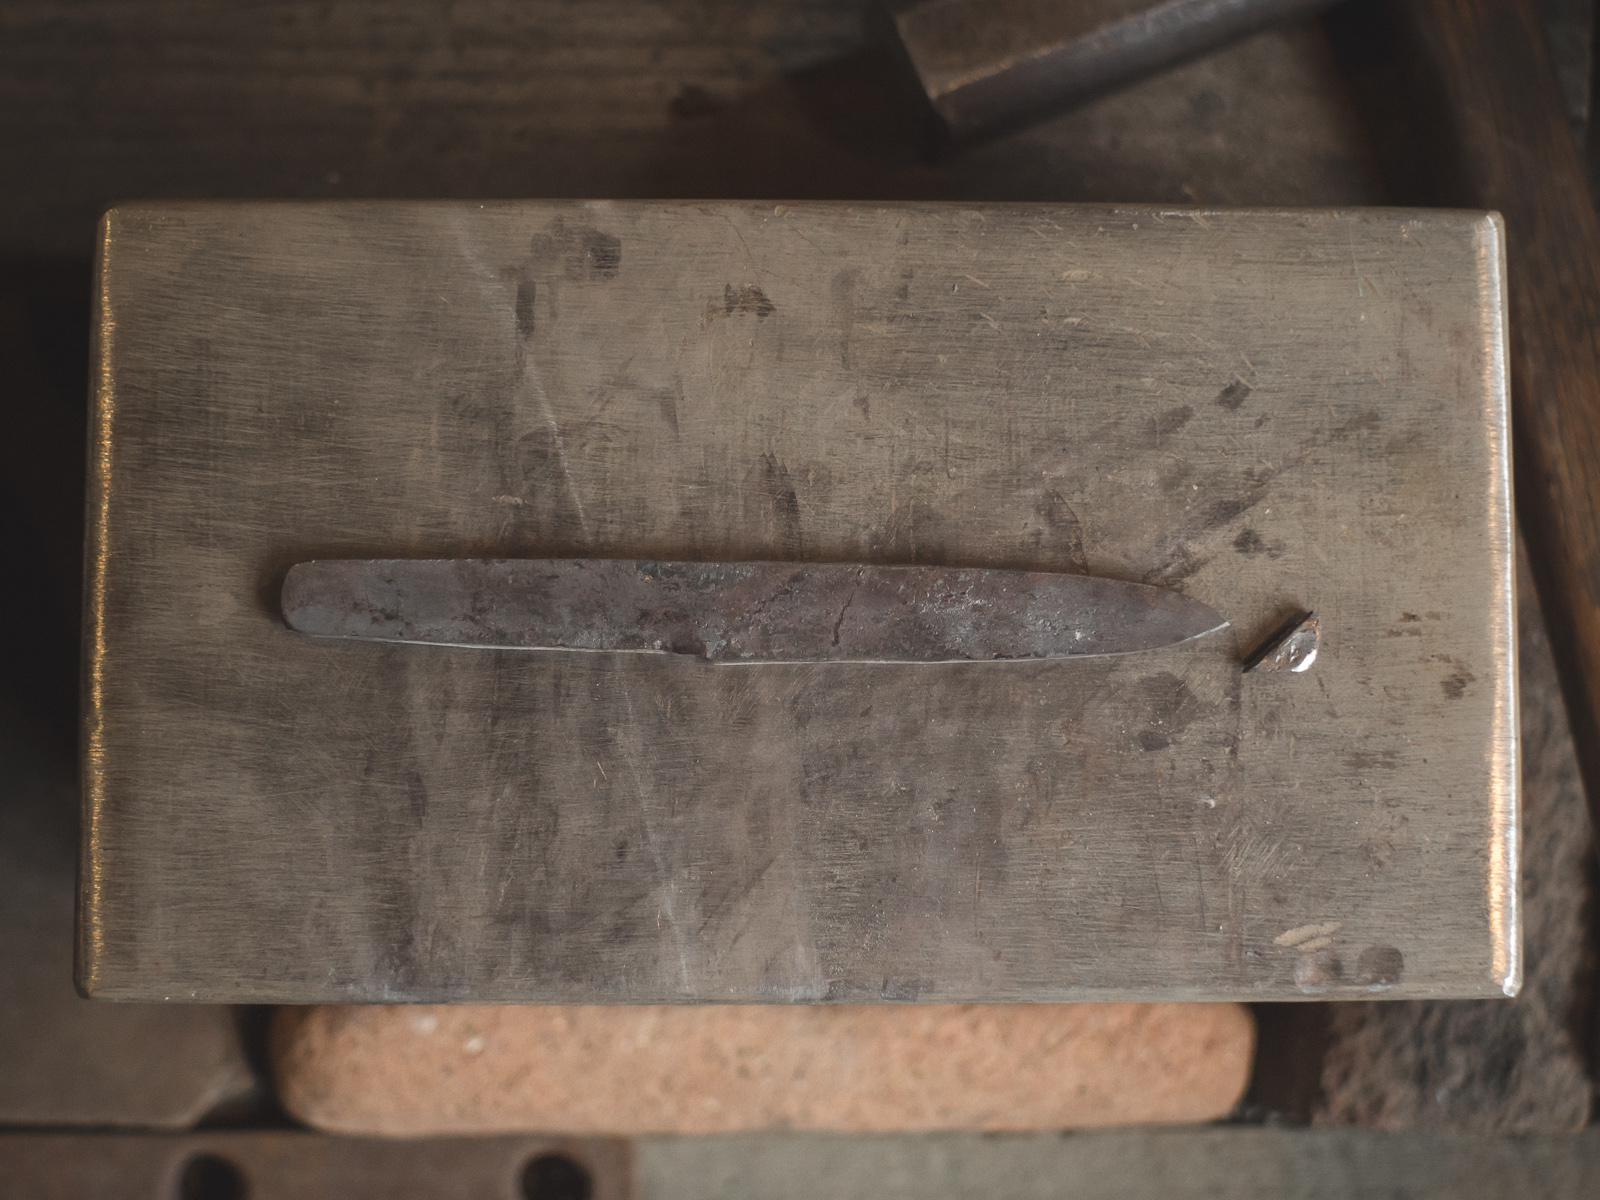 Island Blacksmith: Charcoal forged knives reclaimed from antique steel.